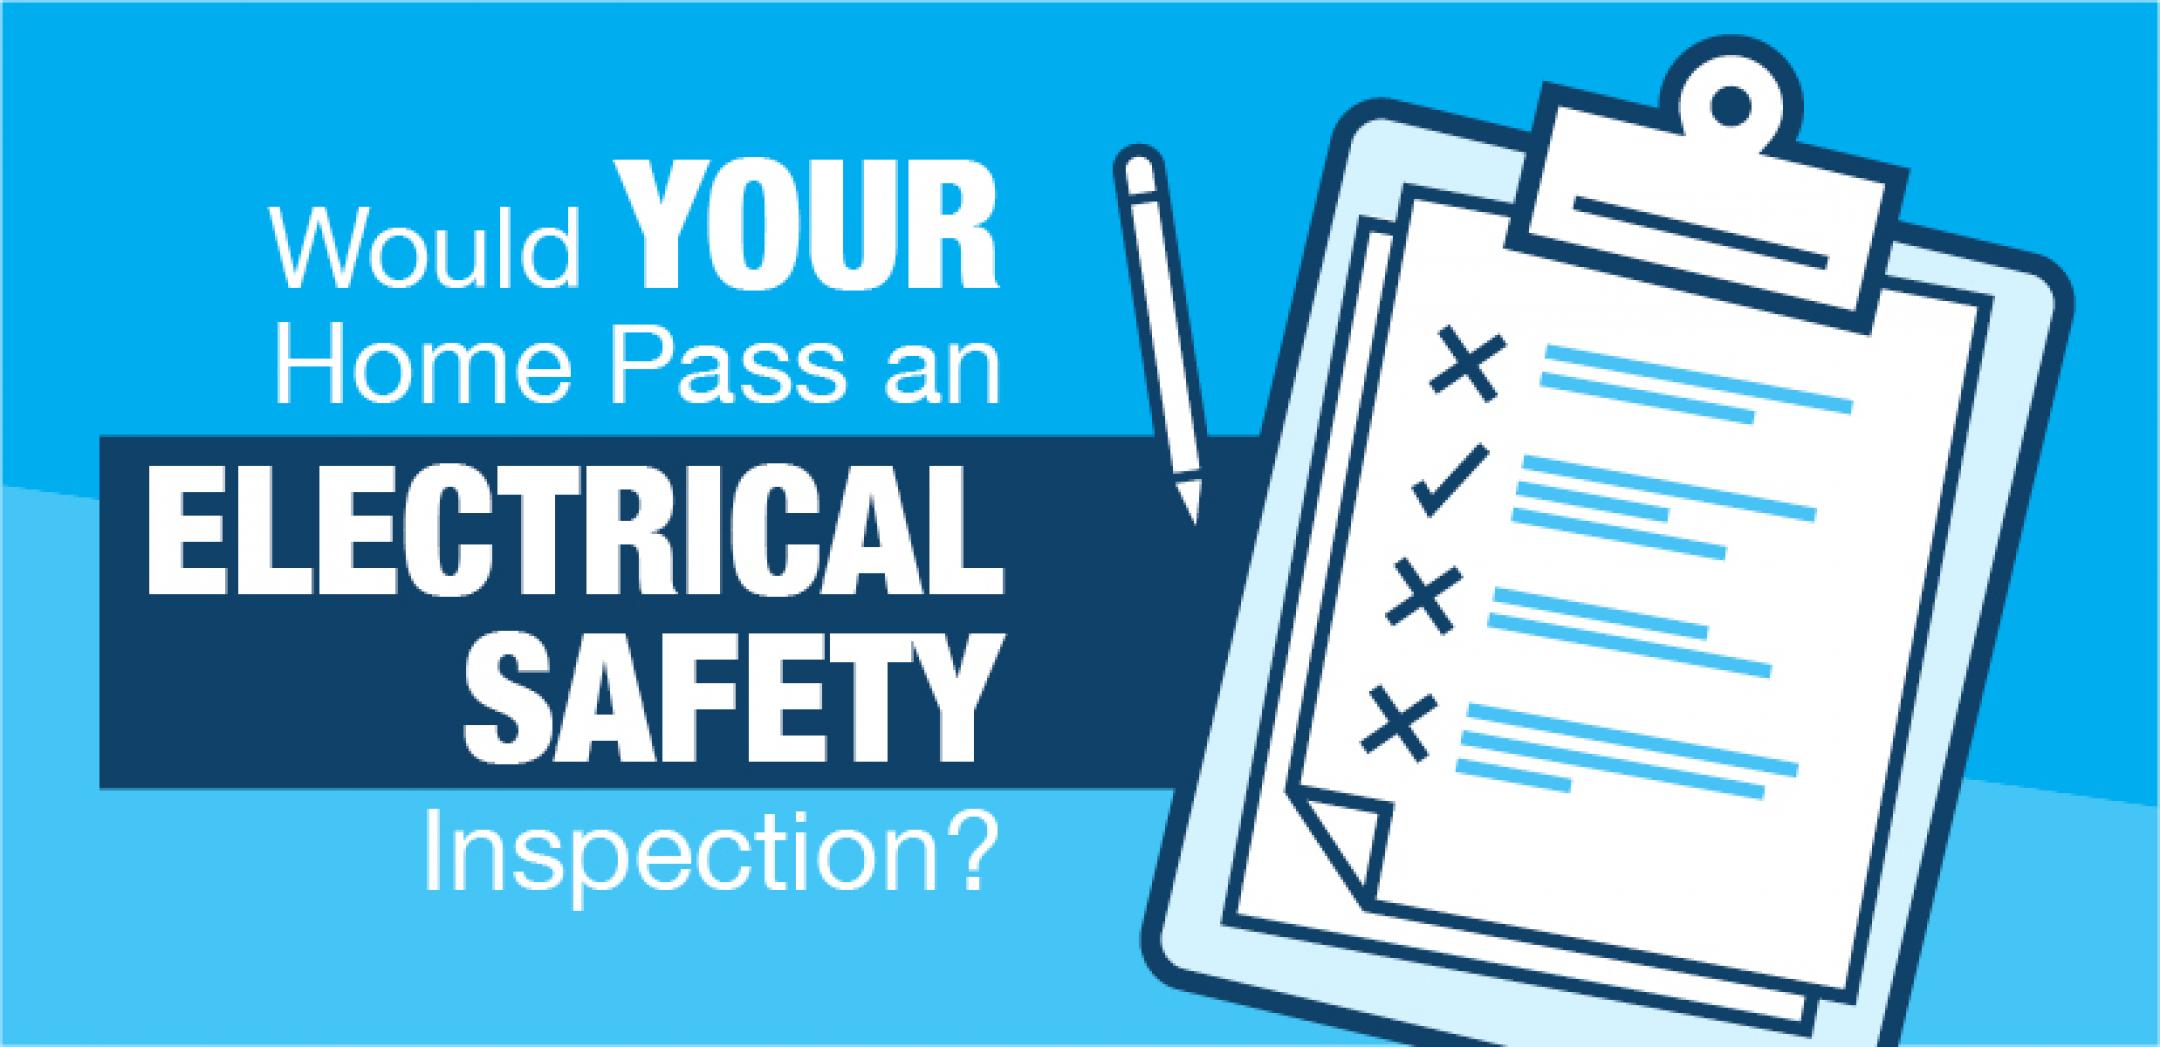 Would Your Home Pass an Electrical Safety Inspection?